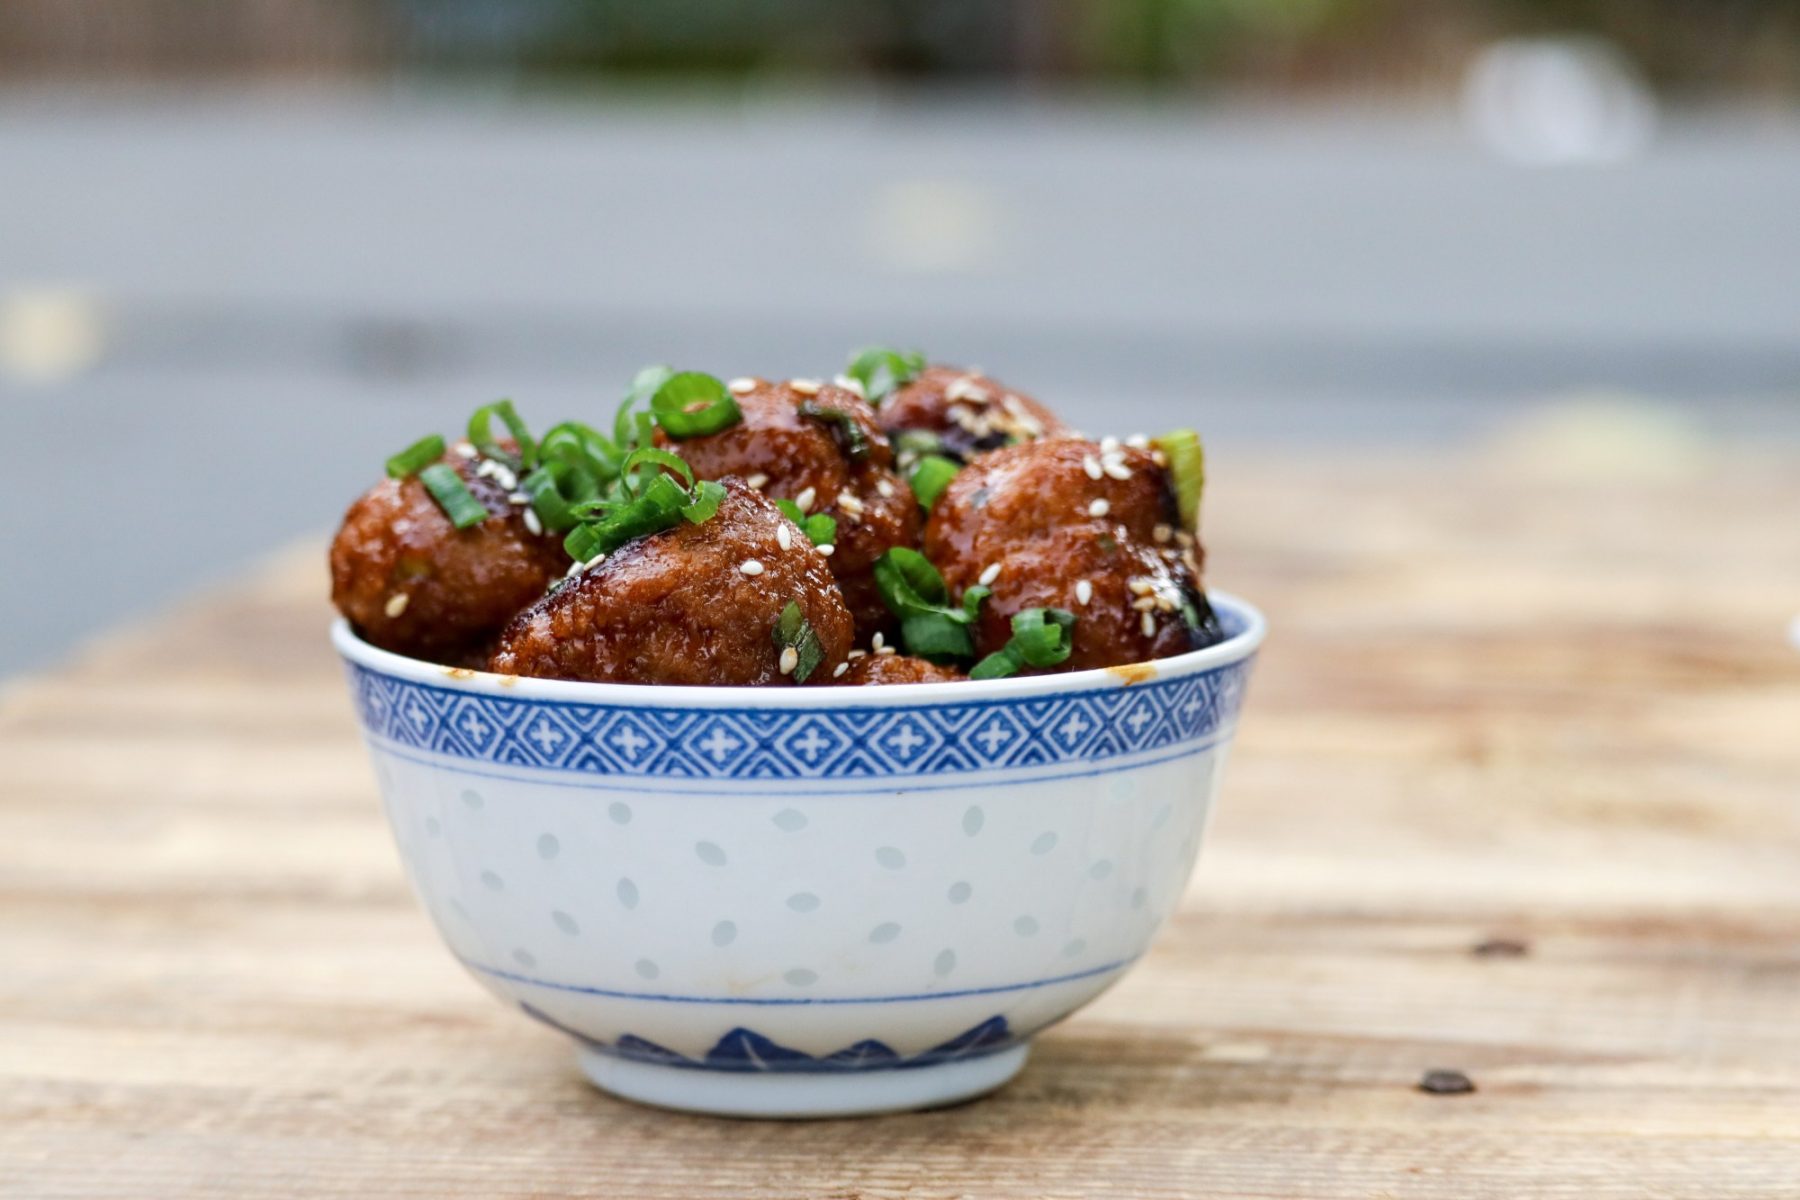 A bowl of Asian meatballs